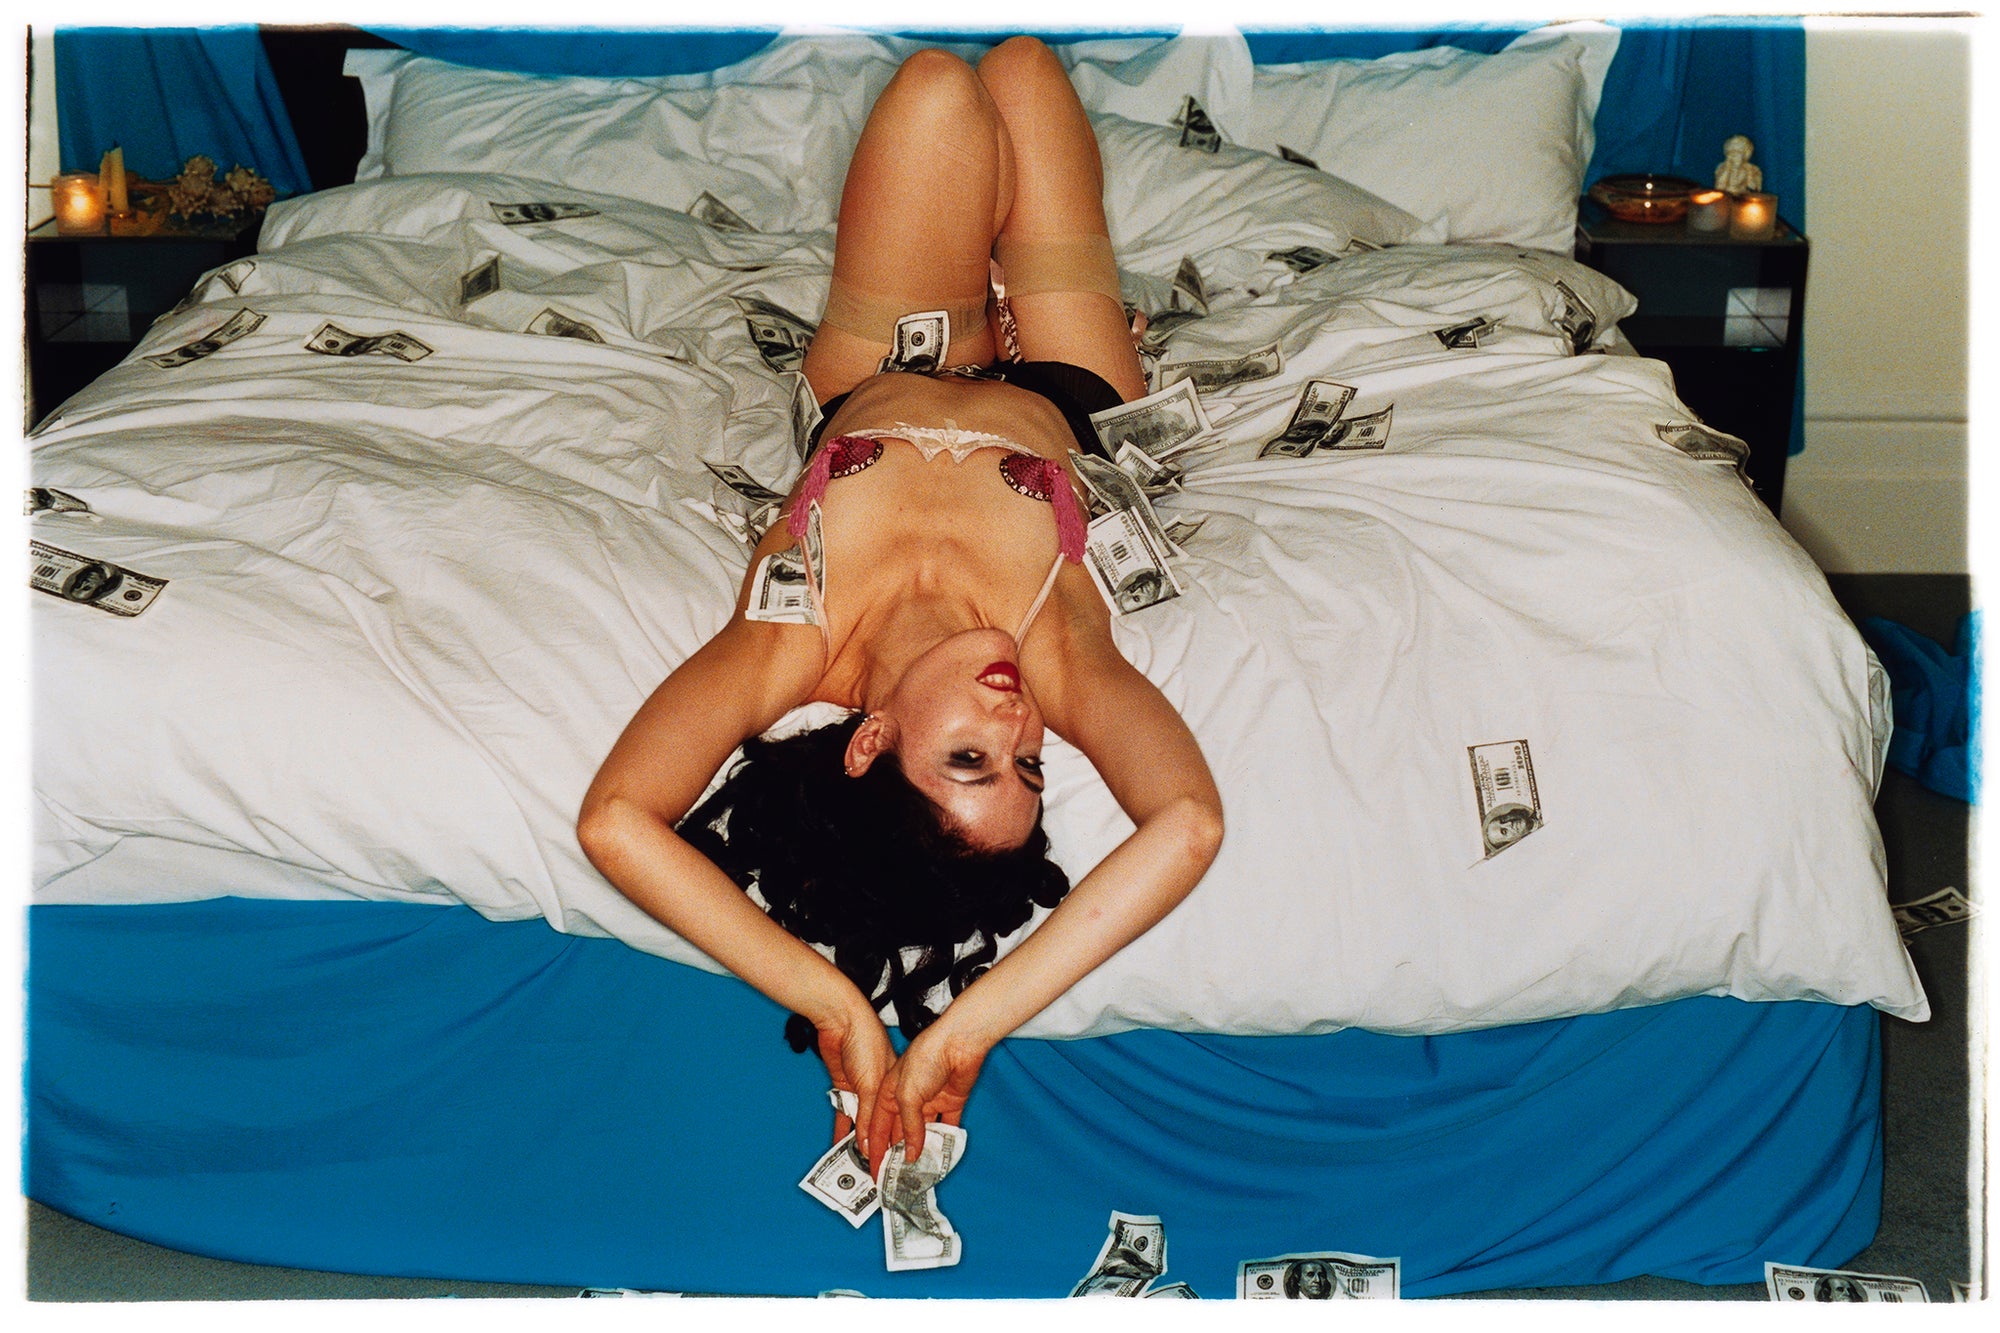 Photograph by Richard Heeps. A woman lies semi naked on a bed with money surrounding her. The photograph is taken from the end of the bed so the woman appears upside down. The bed has a white duvet with blue under sheets.